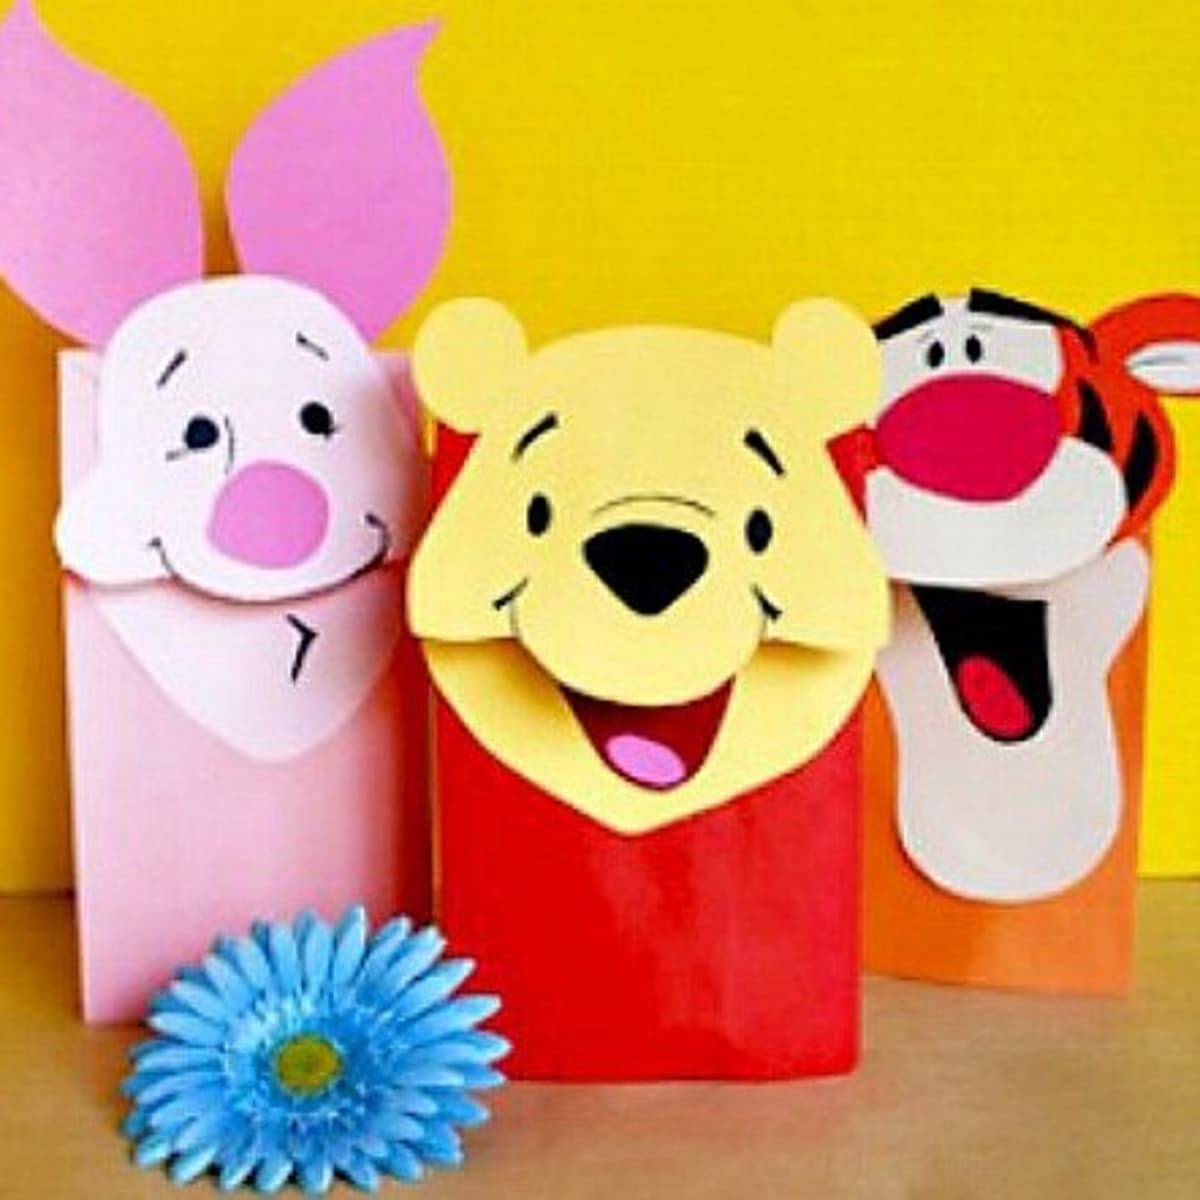 Easy Toilet Paper Roll Crafts For Kids - The Farm Girl Gabs®